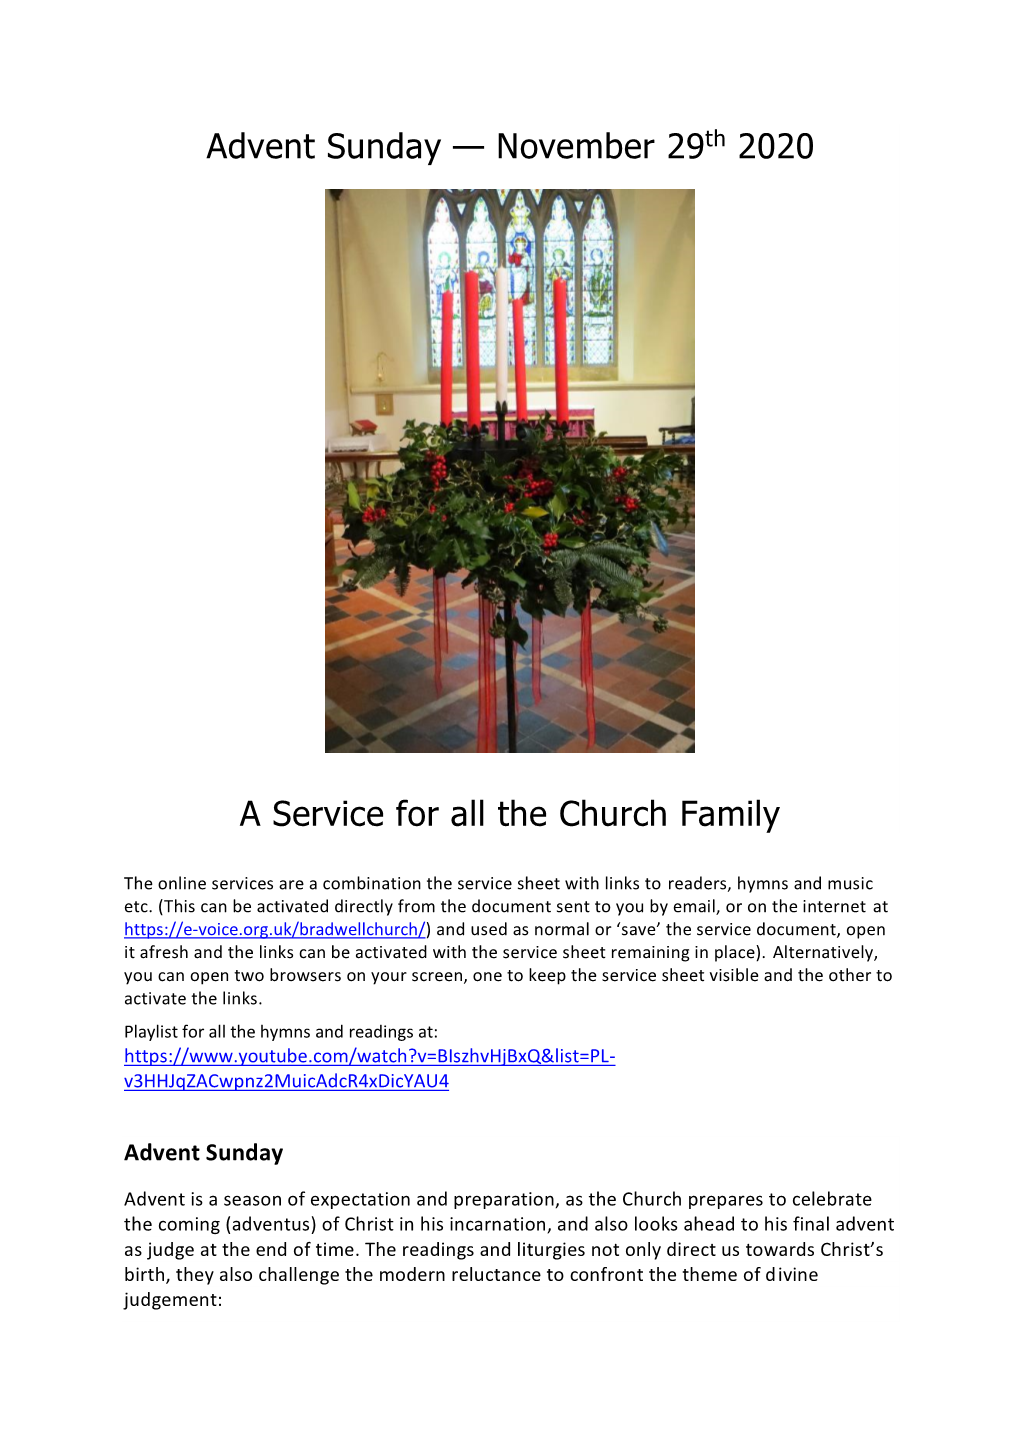 Advent Sunday — November 29Th 2020 a Service for All the Church